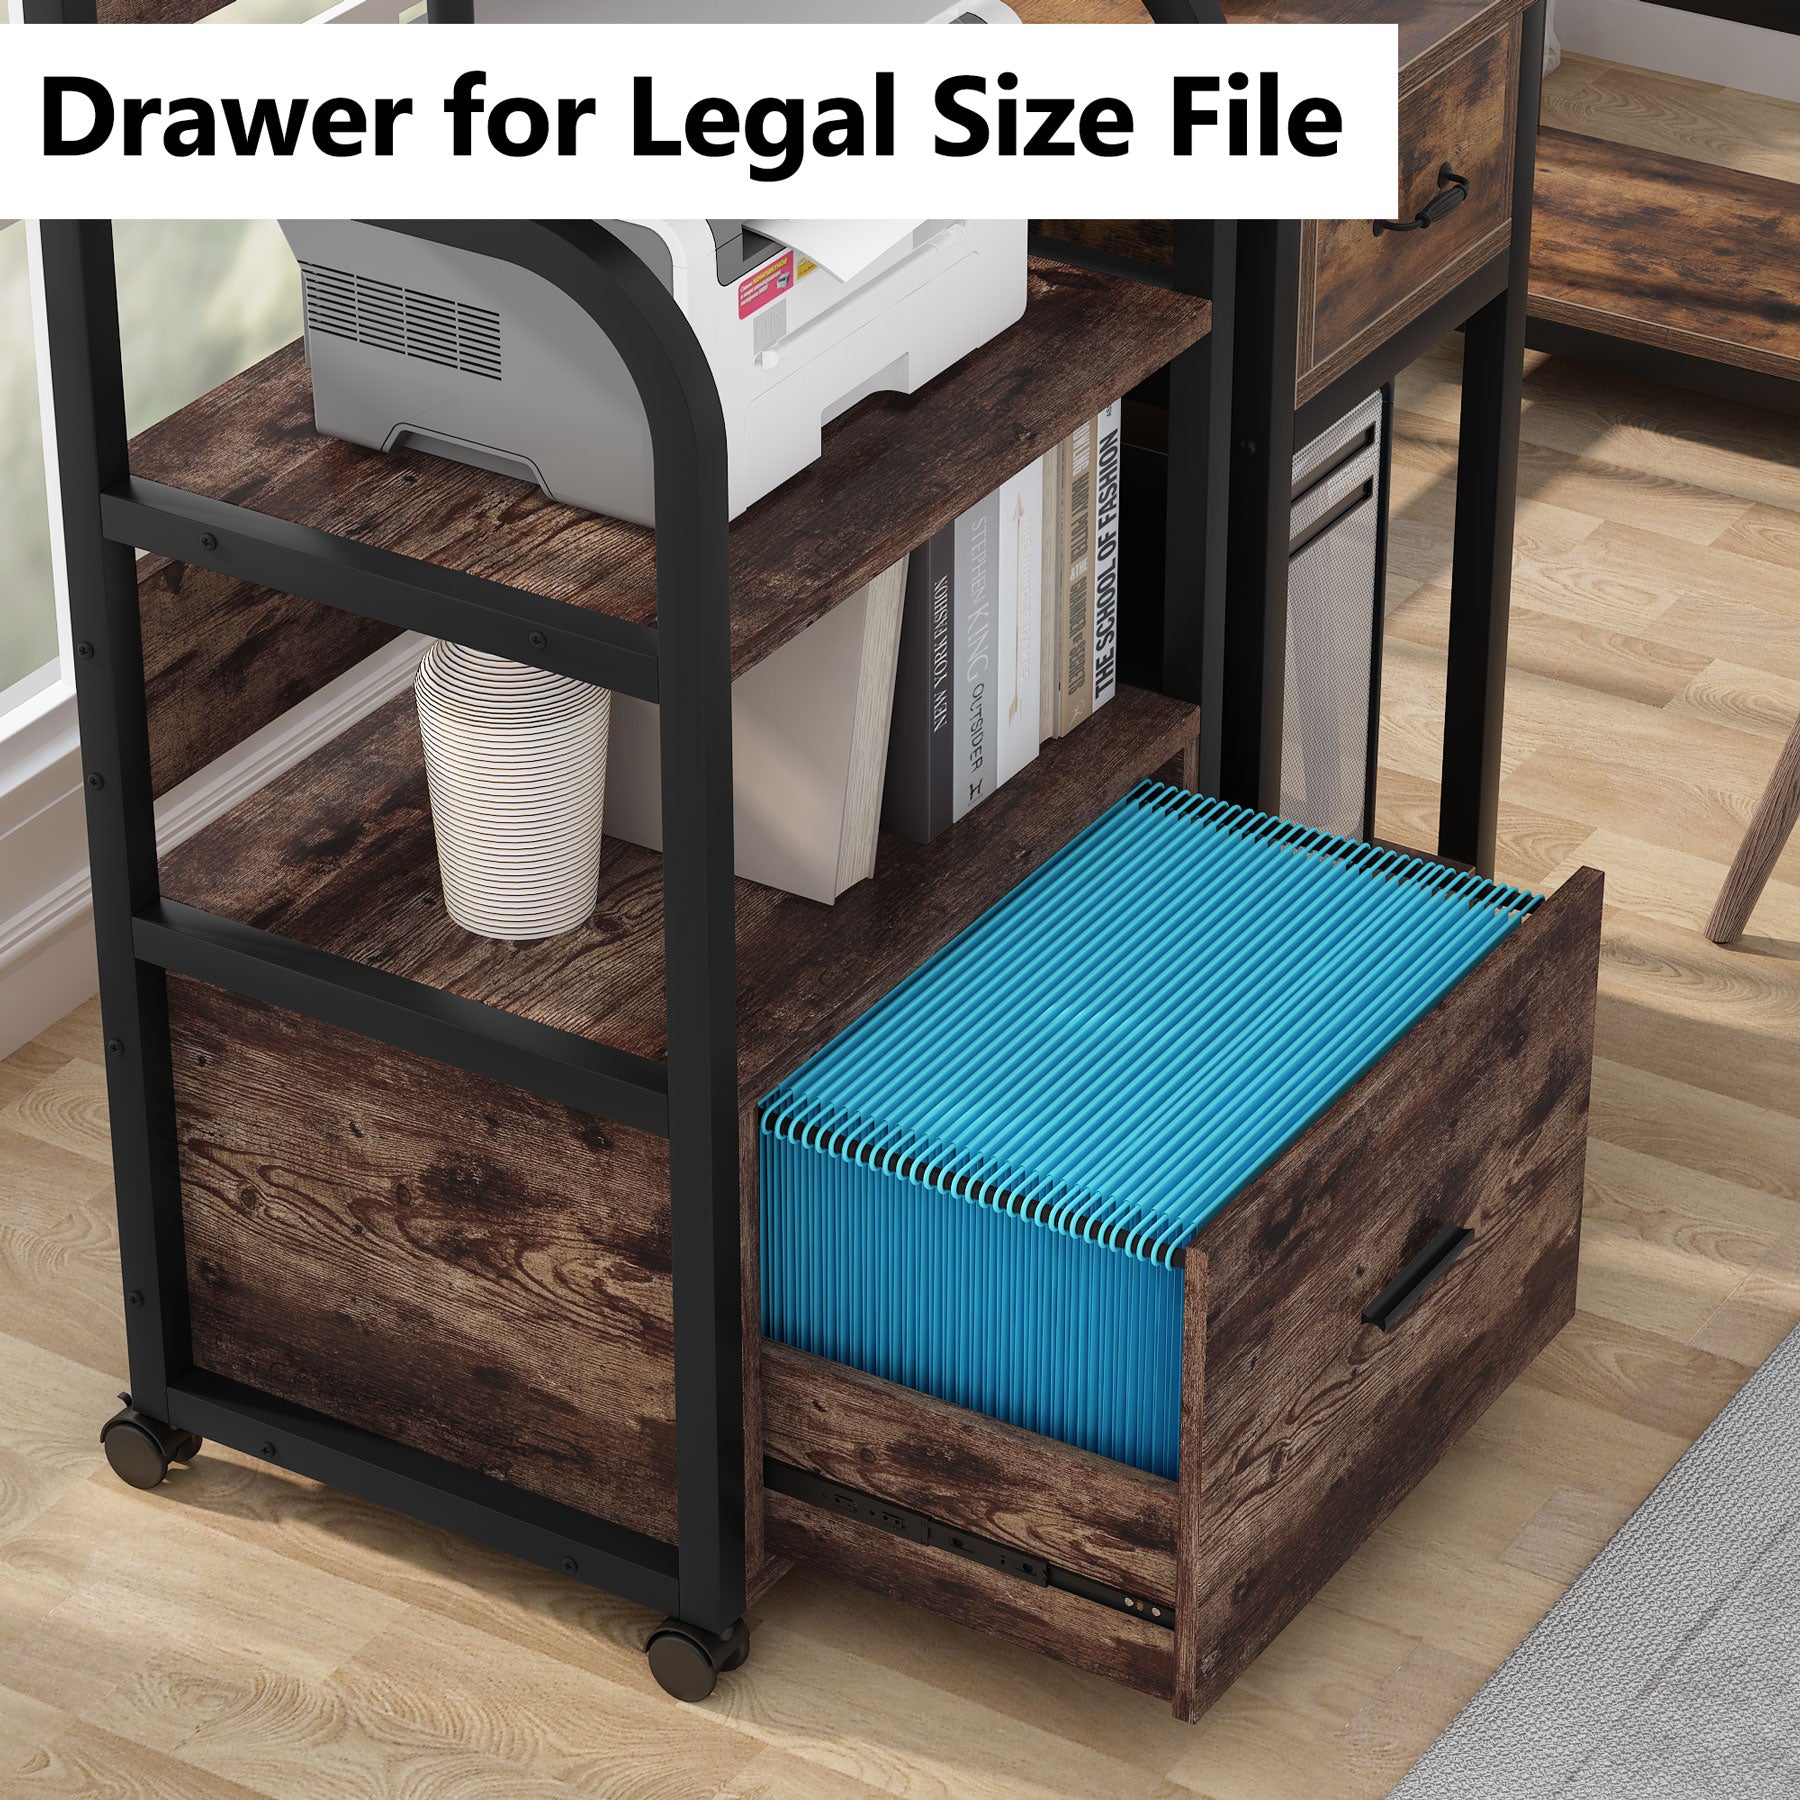 File Cabinet, 3 Tier Mobile Printer Stand with Legal Size Drawer ...